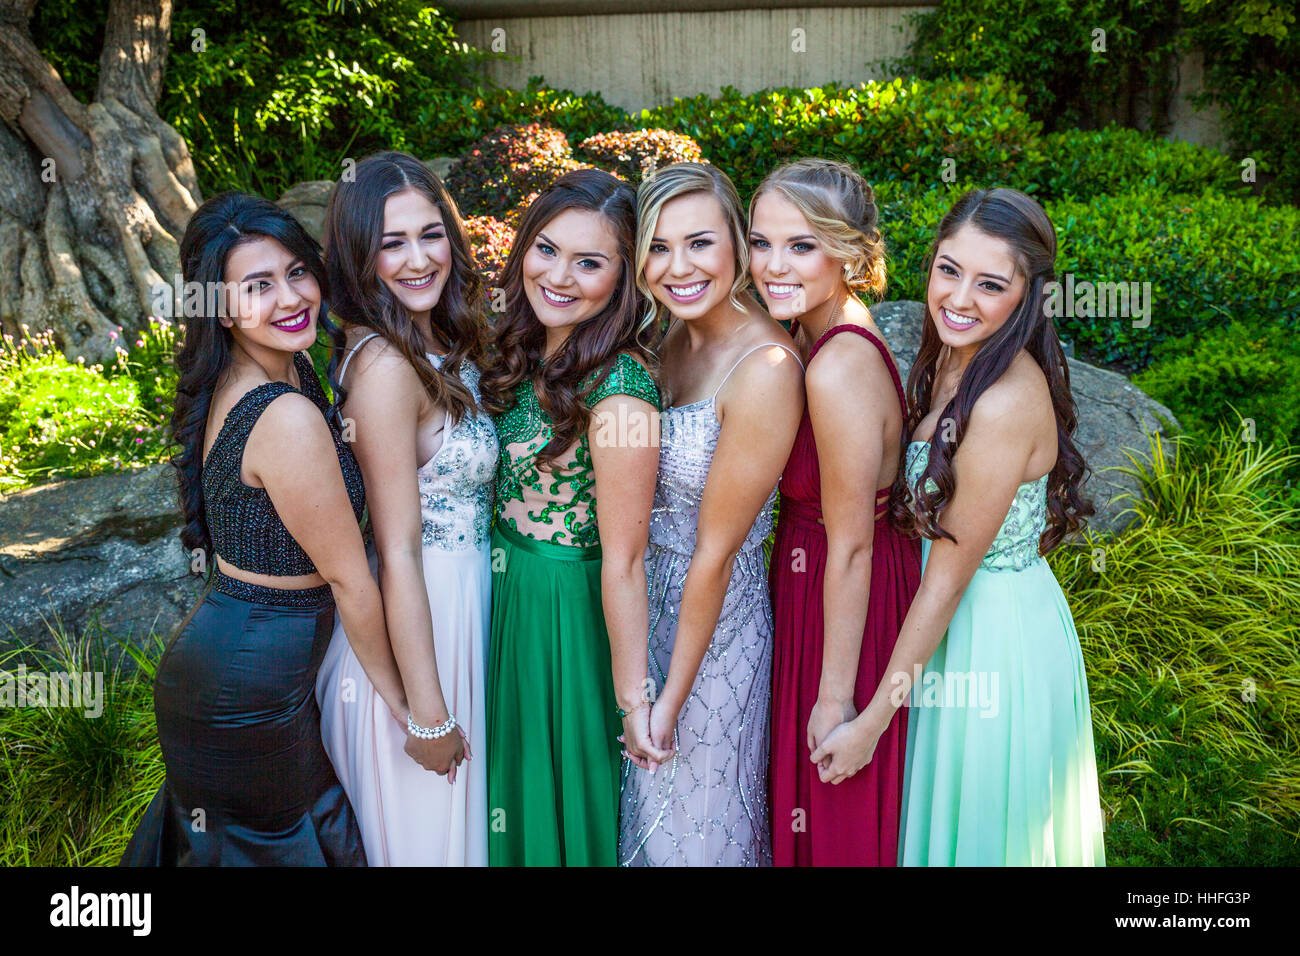 High School friends gather together for their Senior Prom photos Stock Photo